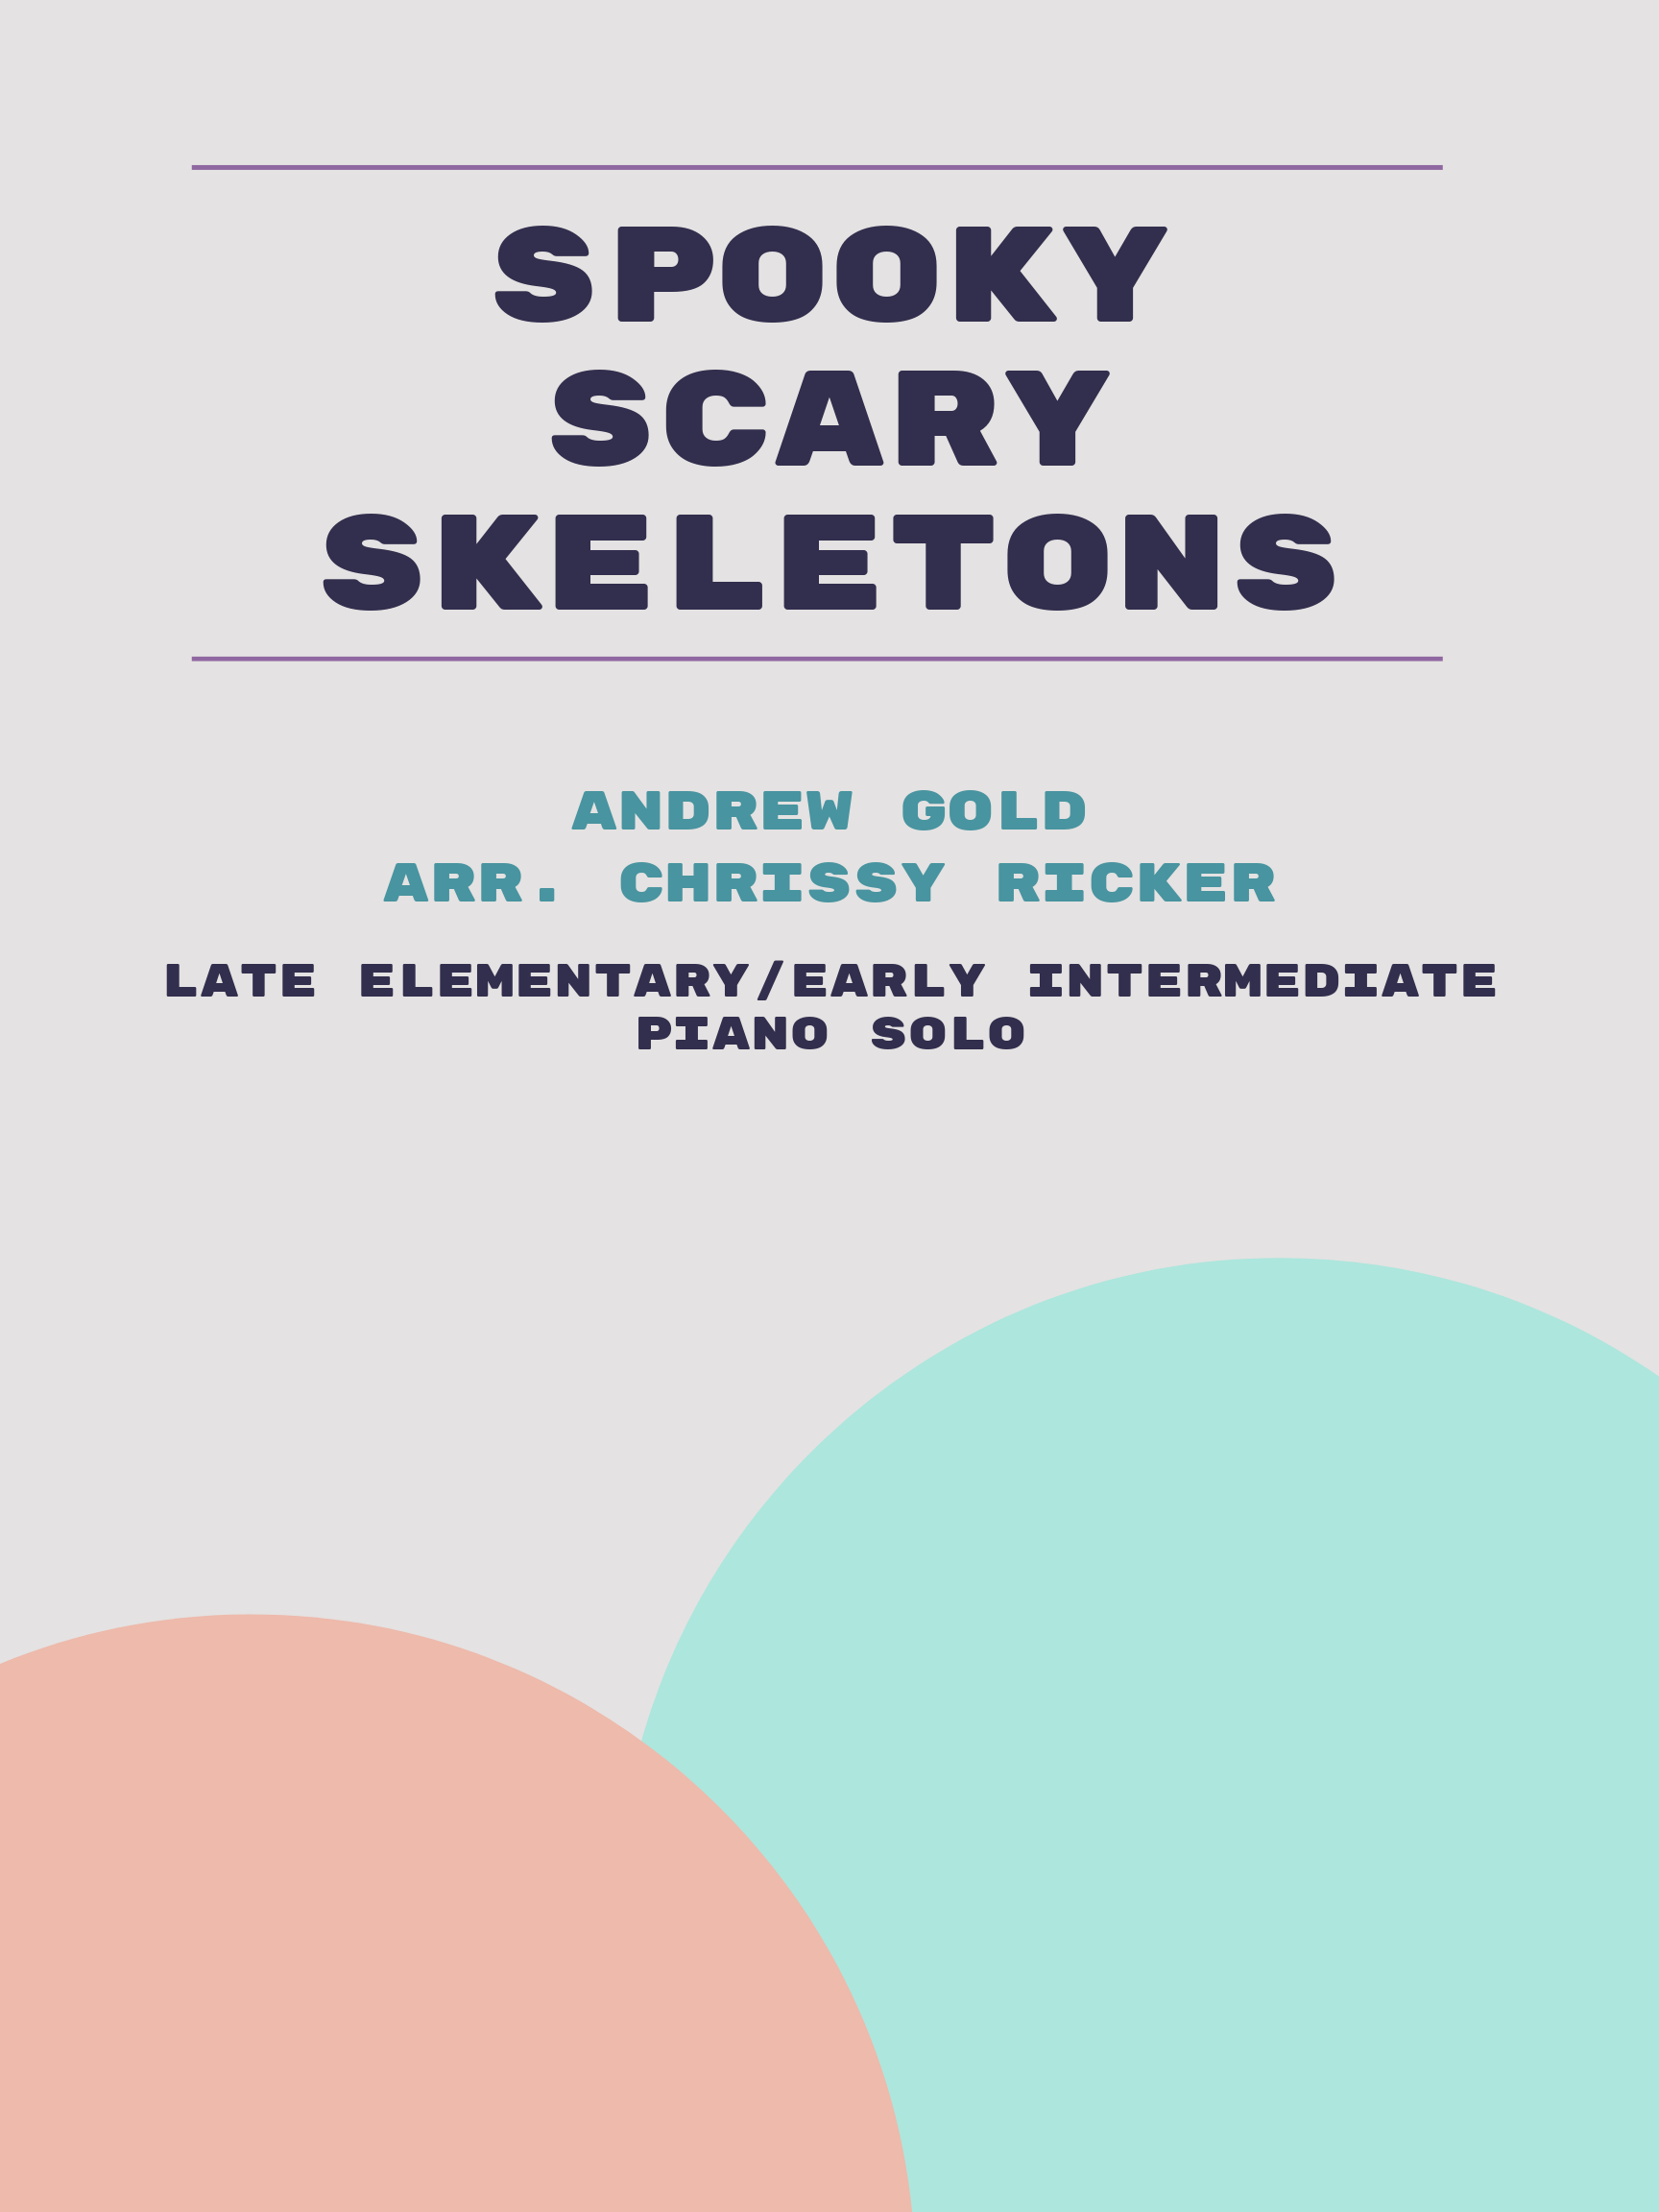 Spooky Scary Skeletons by Andrew Gold